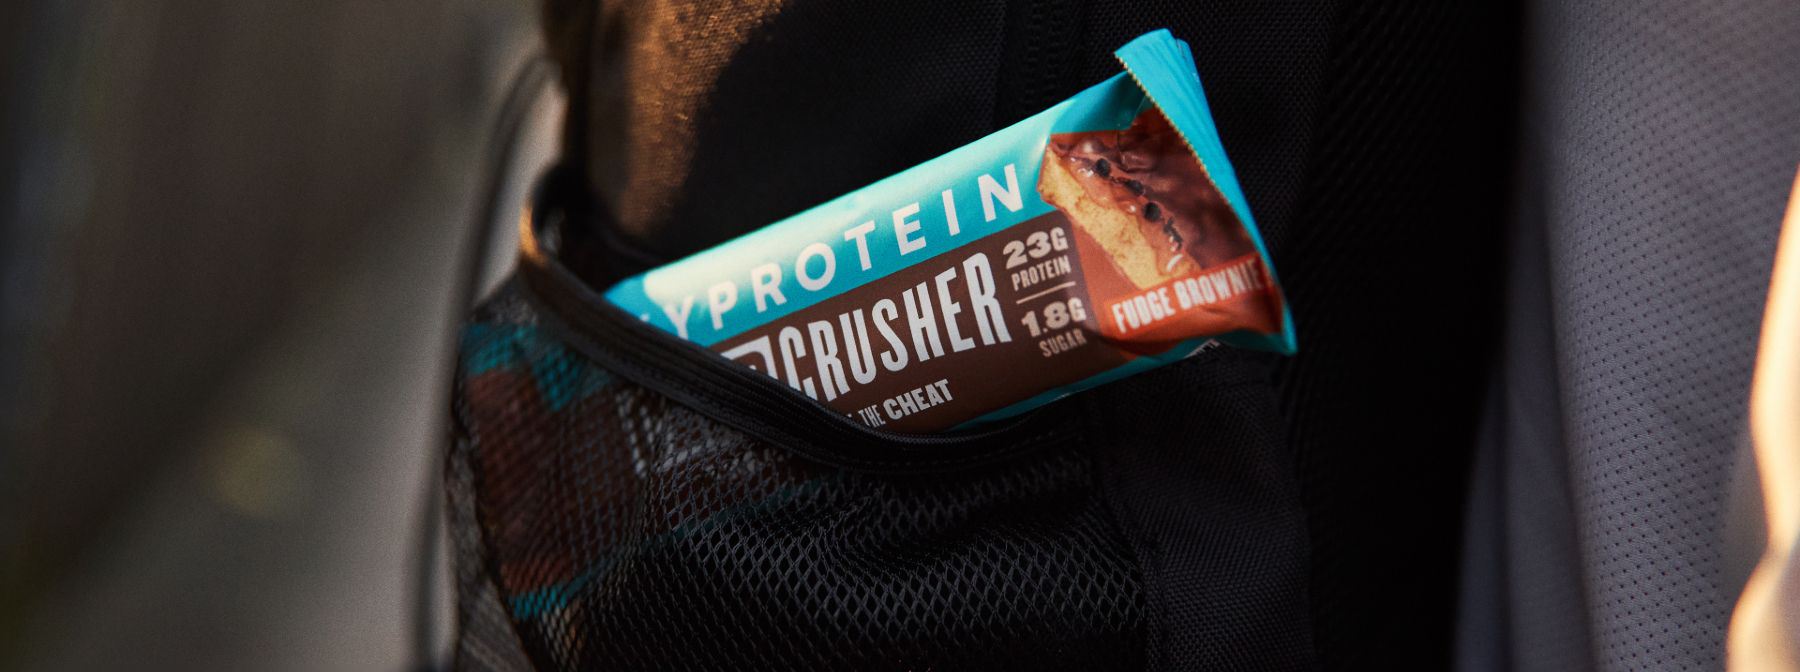 Are Protein Bars Good For You? Healthy Or Hype?